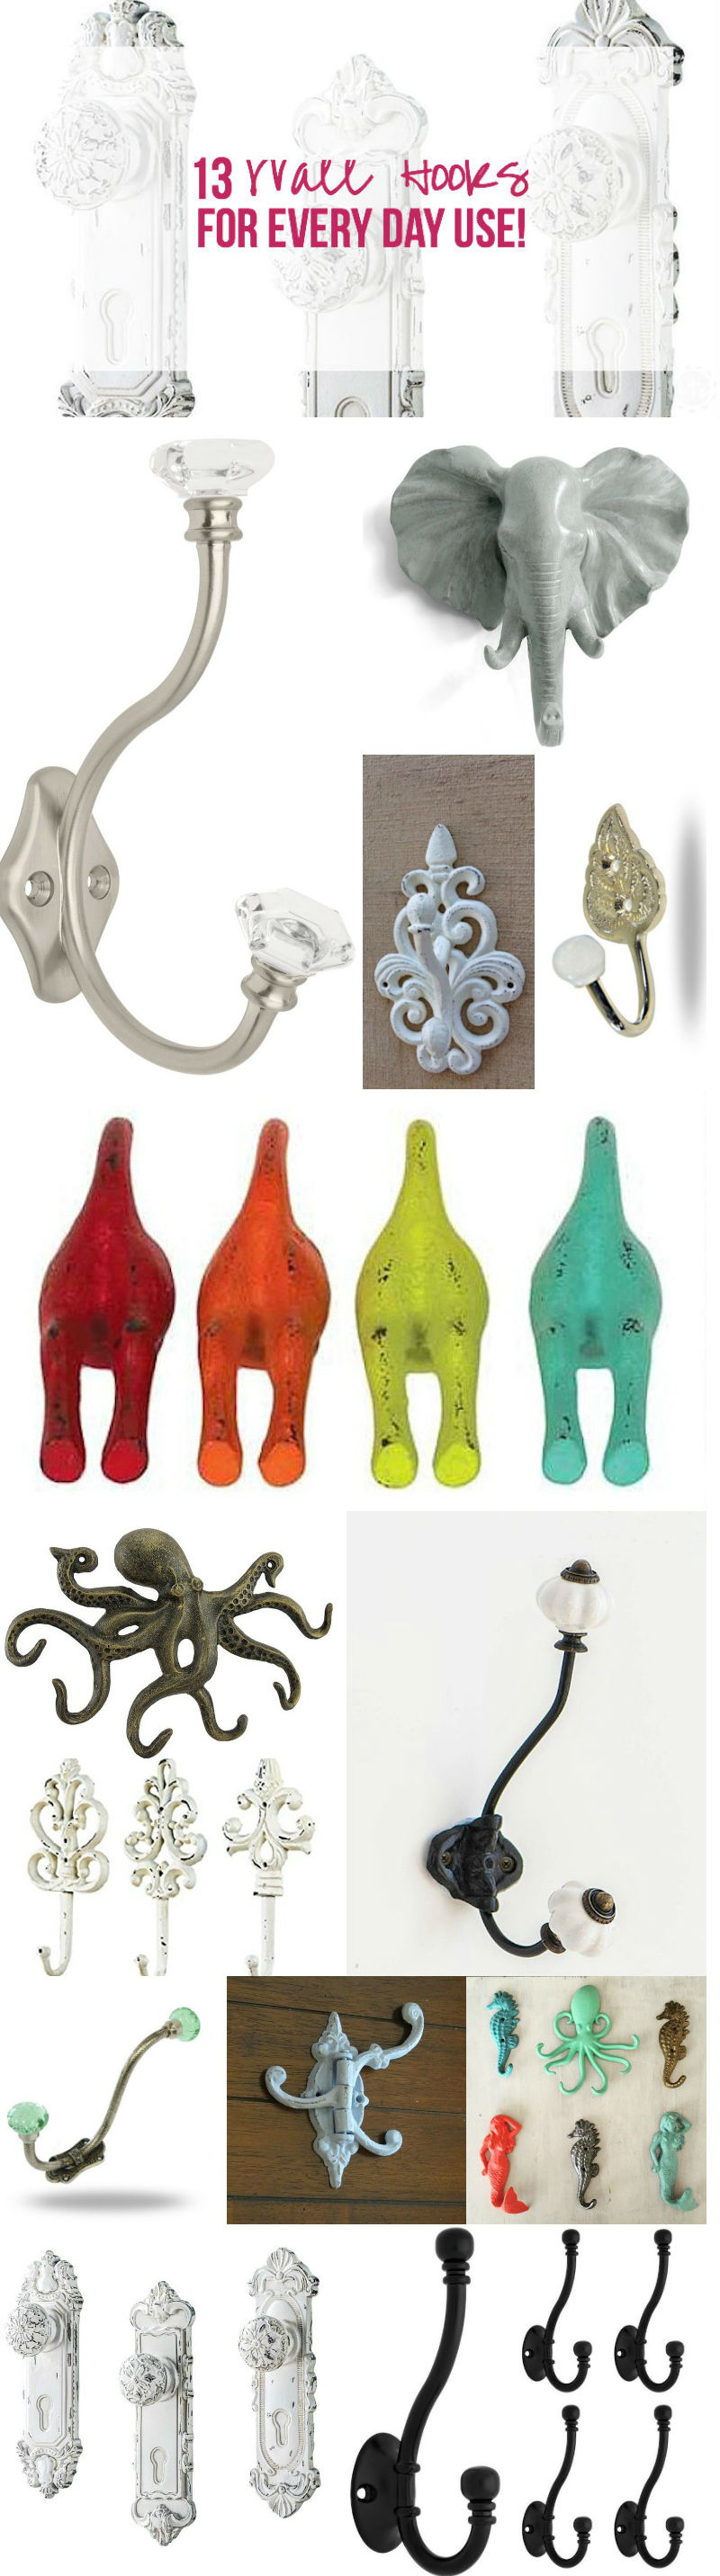 13 Wall Hooks for Every Day Use!